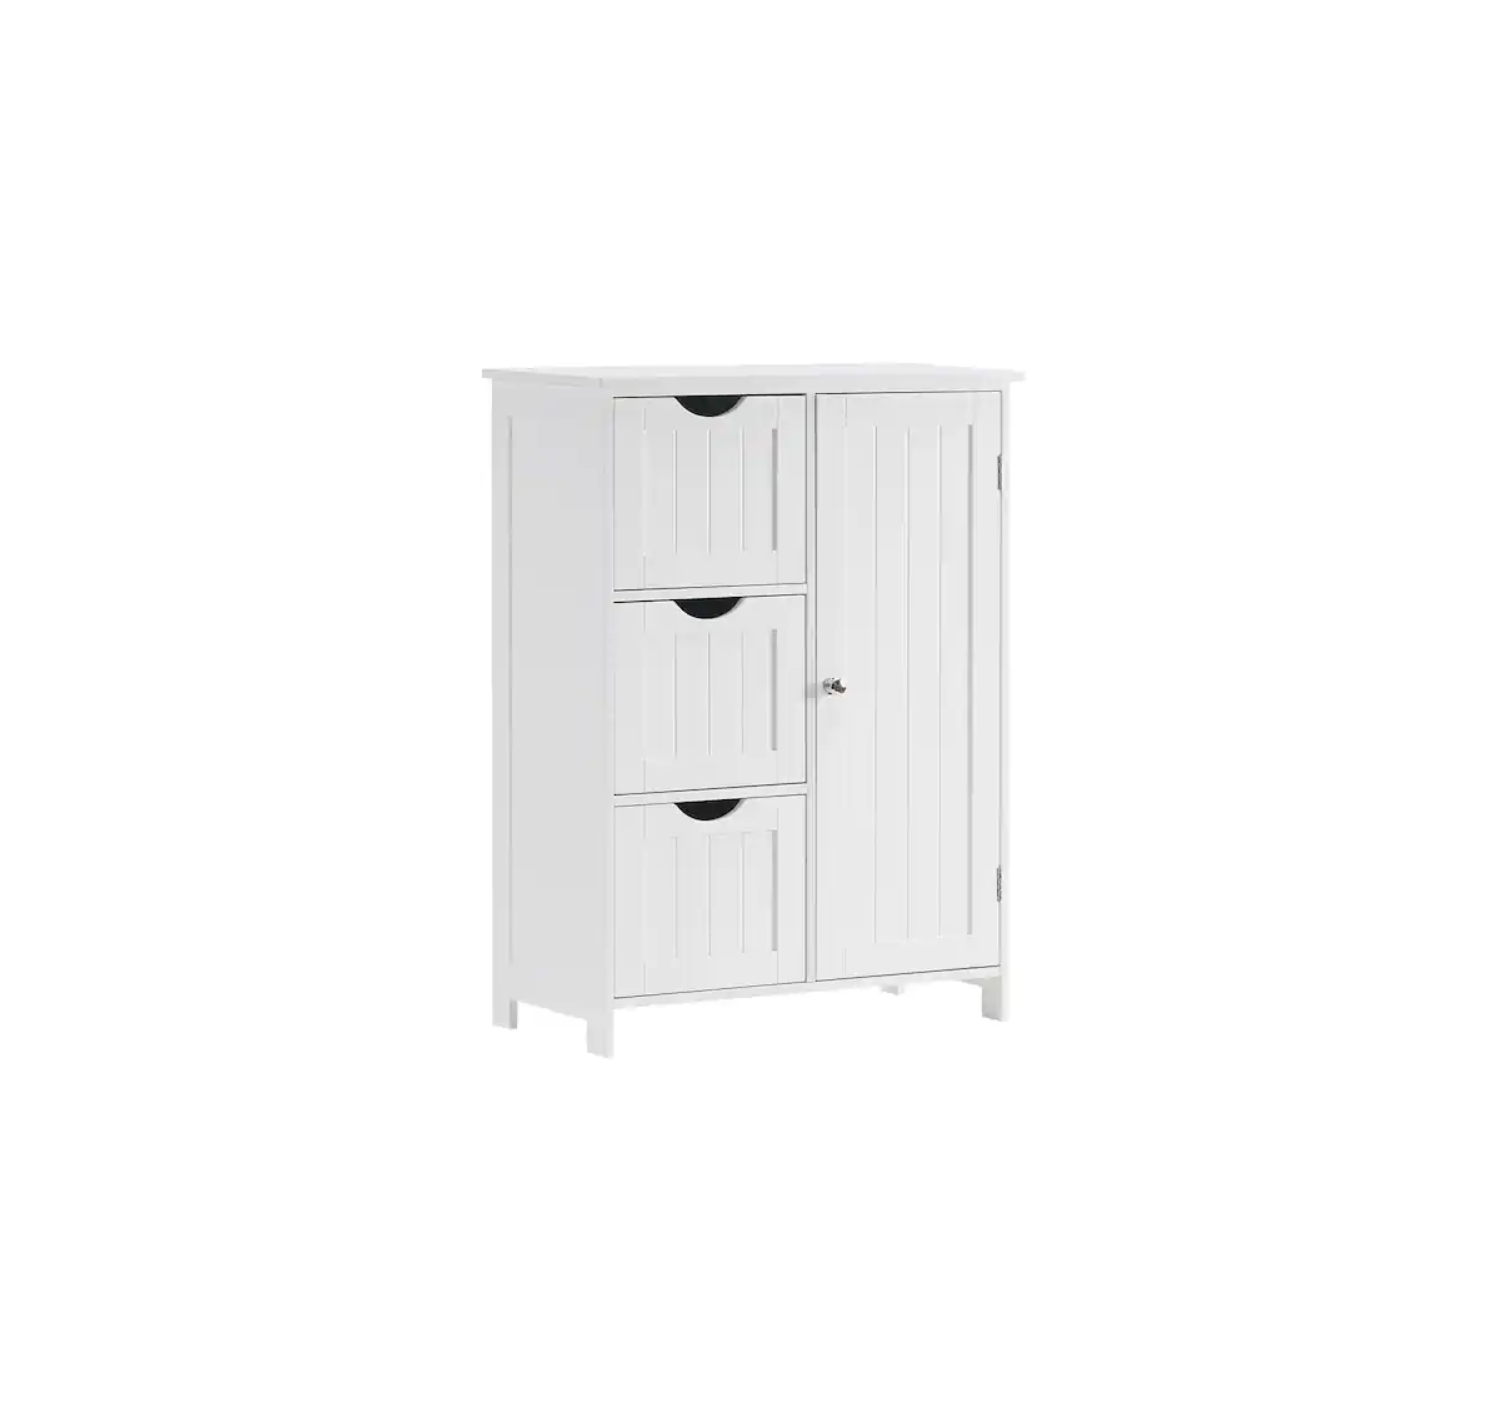 HOMEDEPOT SXB926591 White Linen Cabinet with 3 Large Drawers and 1 Adjustable Shelf Instruction Manual